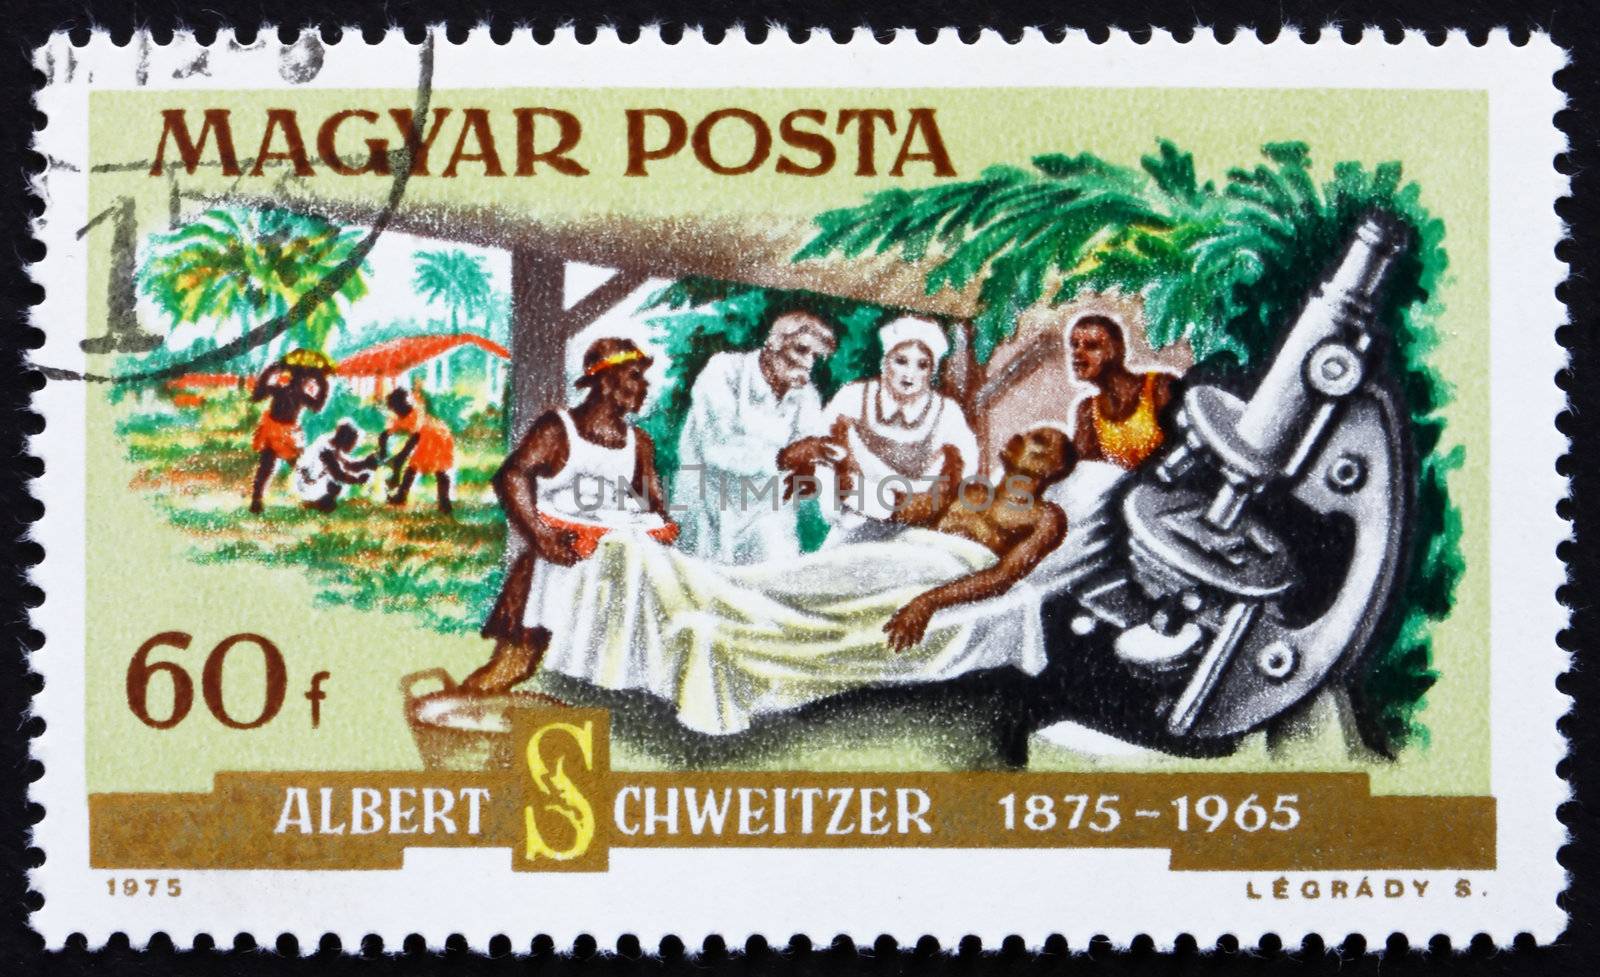 HUNGARY - CIRCA 1975: a stamp printed in the Hungary shows Dr. Albert Schweitzer, Patient and Microscope, Medical Missionary and Musician, circa 1975